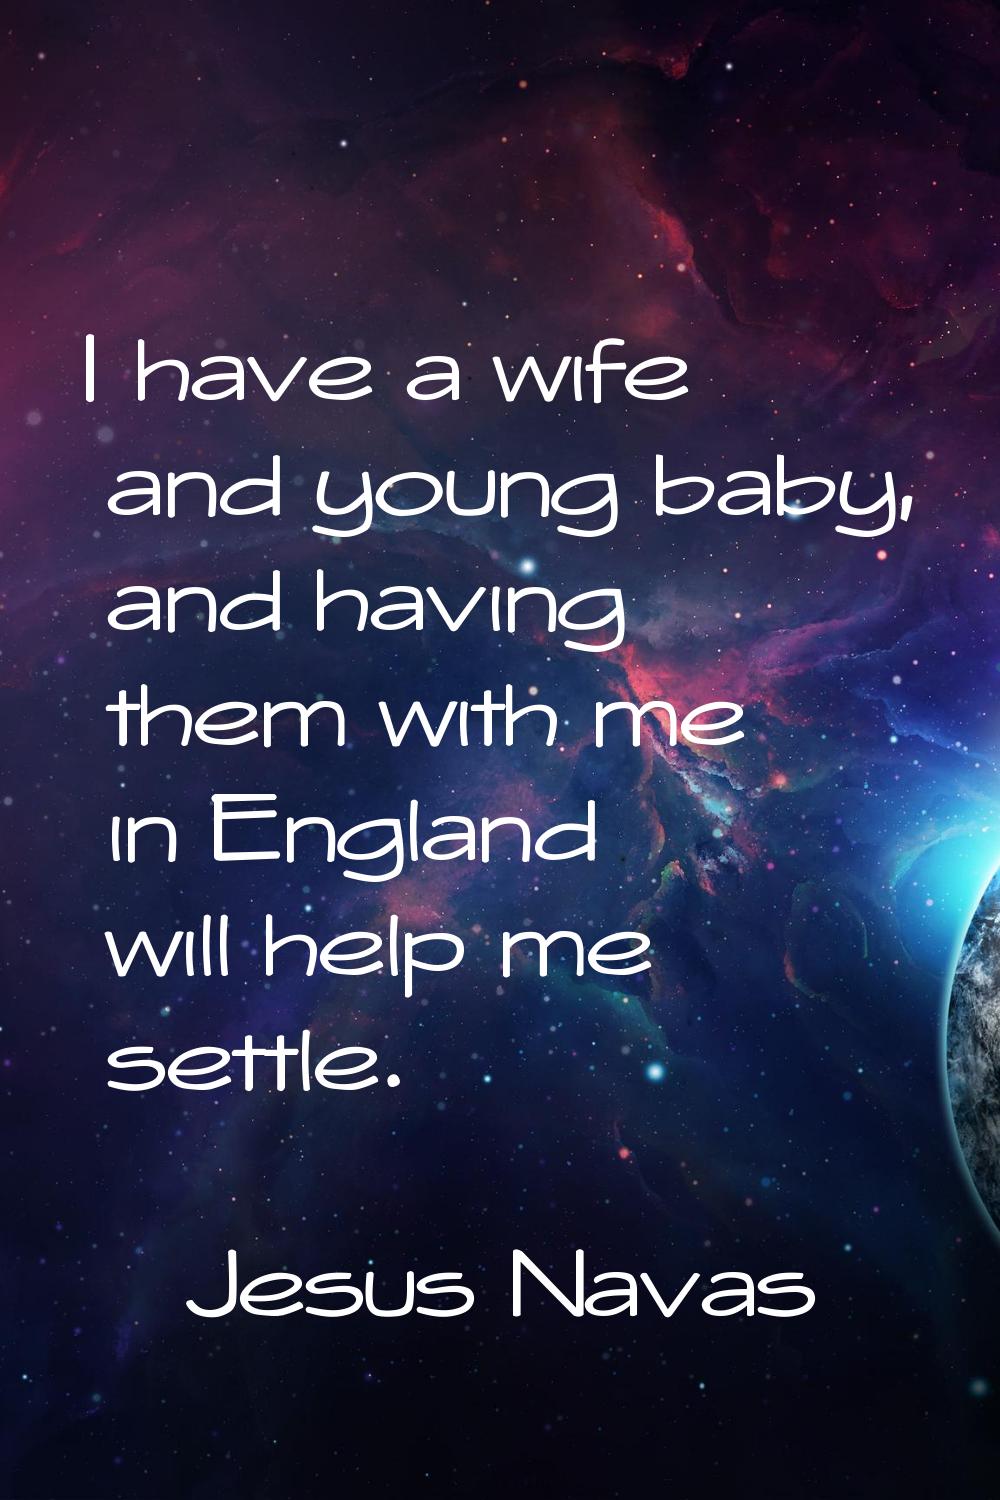 I have a wife and young baby, and having them with me in England will help me settle.